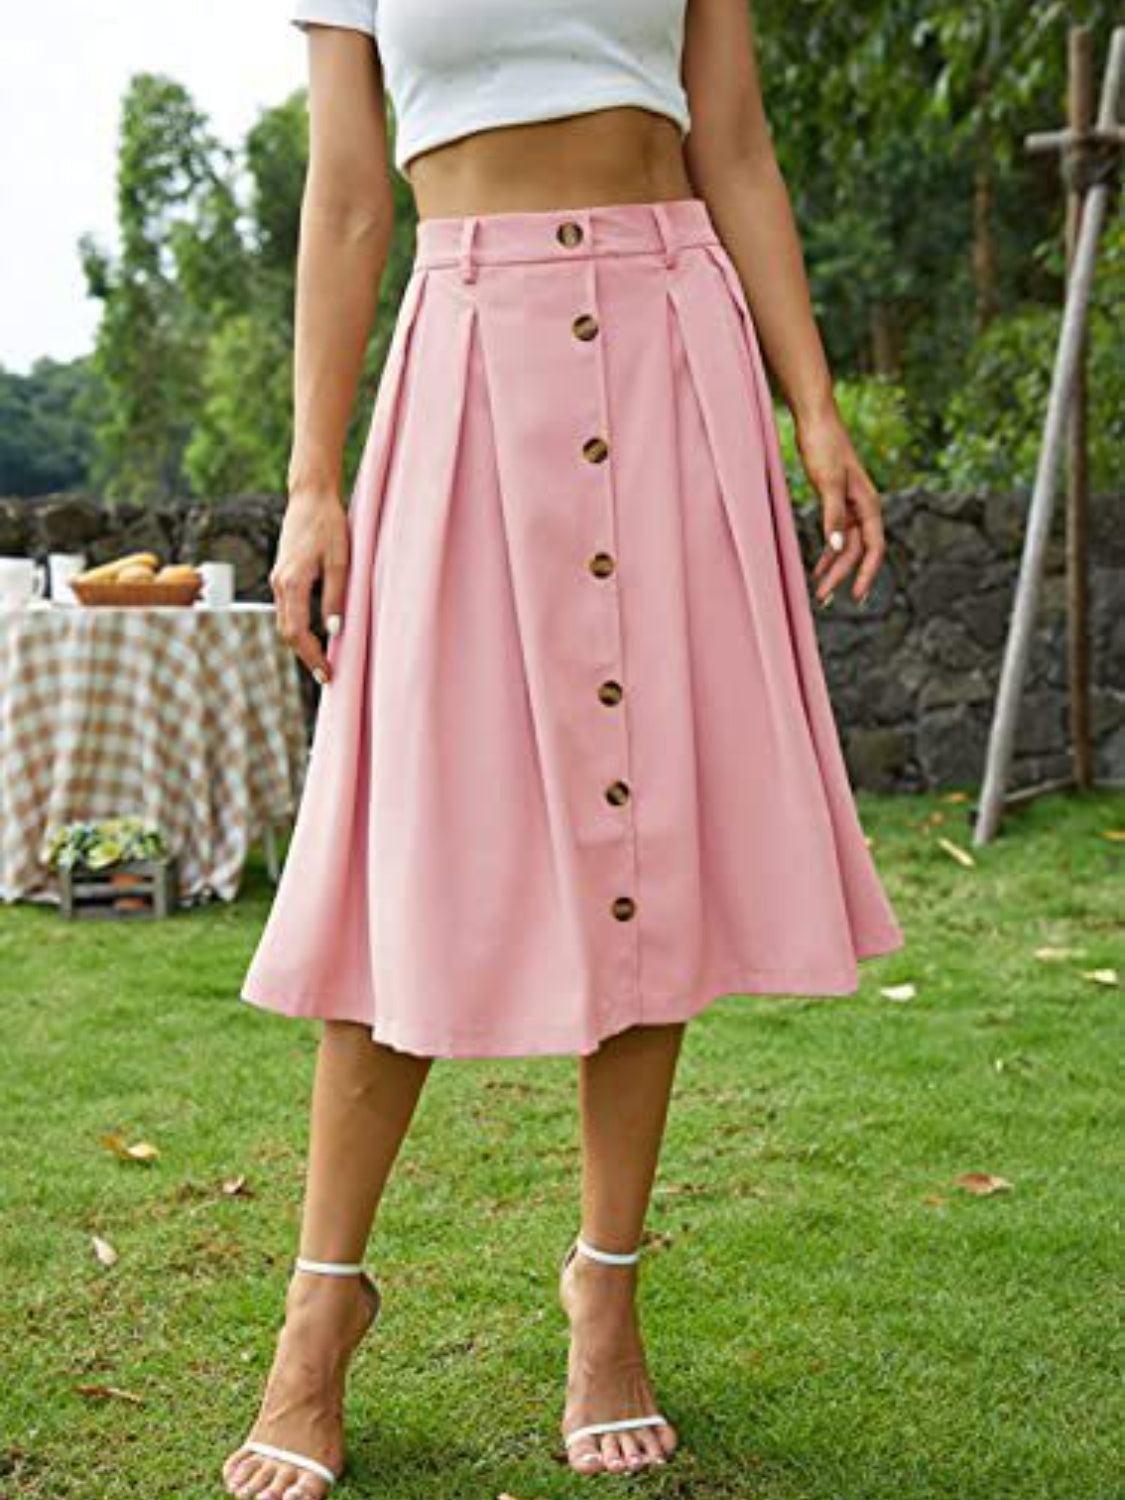 a woman standing in a field wearing a pink skirt